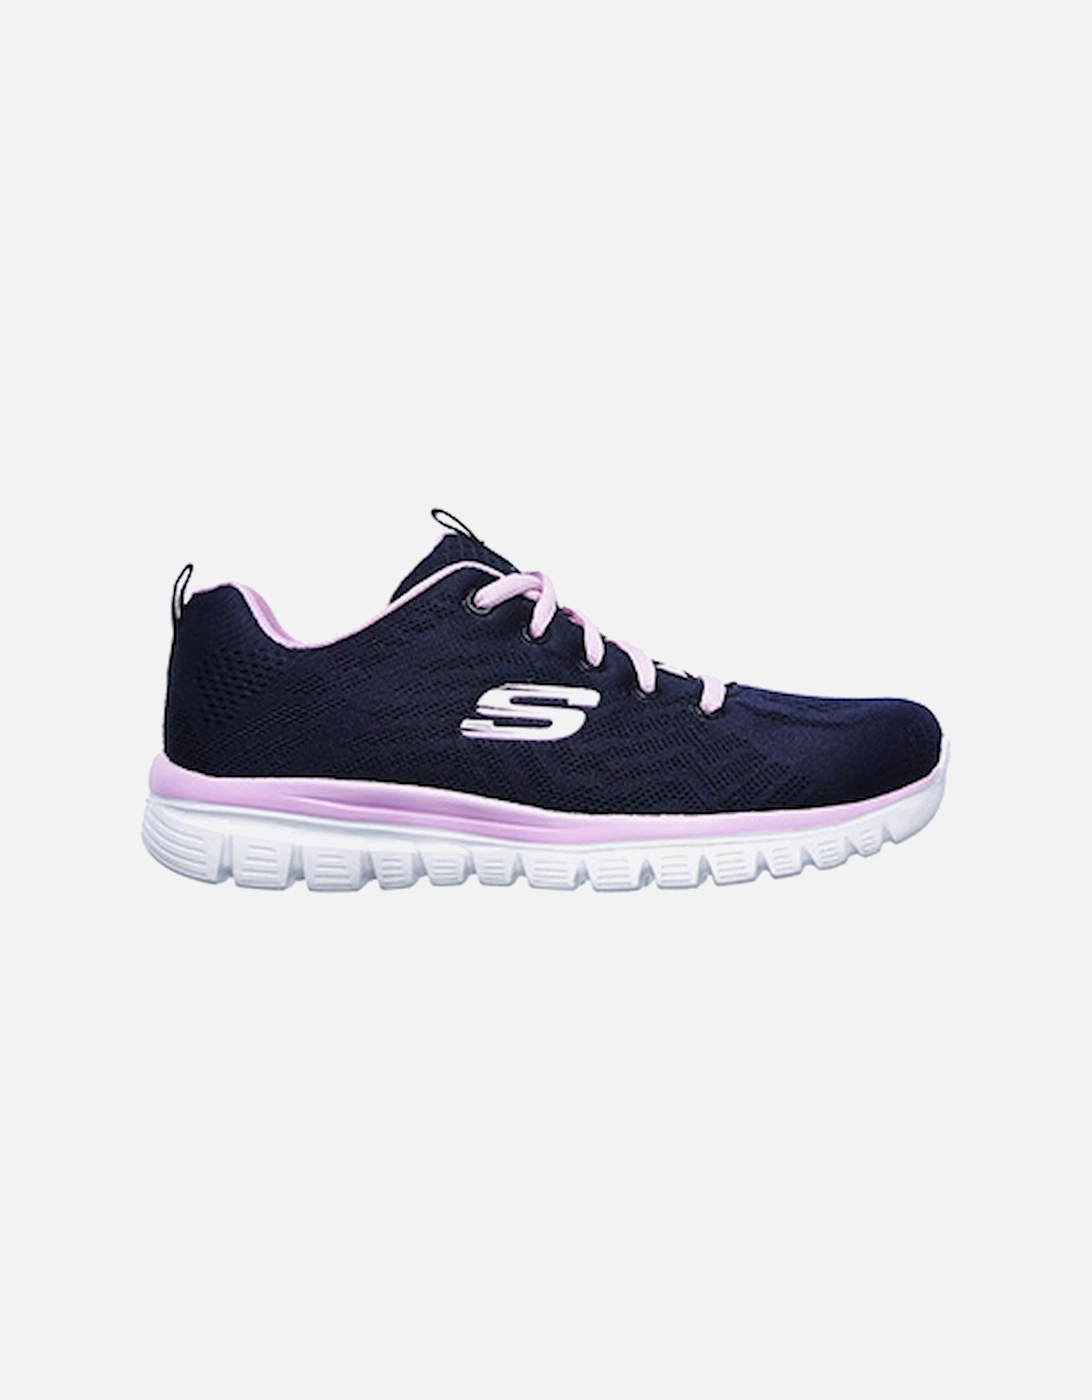 Women's Graceful Get Connected Sports Shoe Navy/Pink